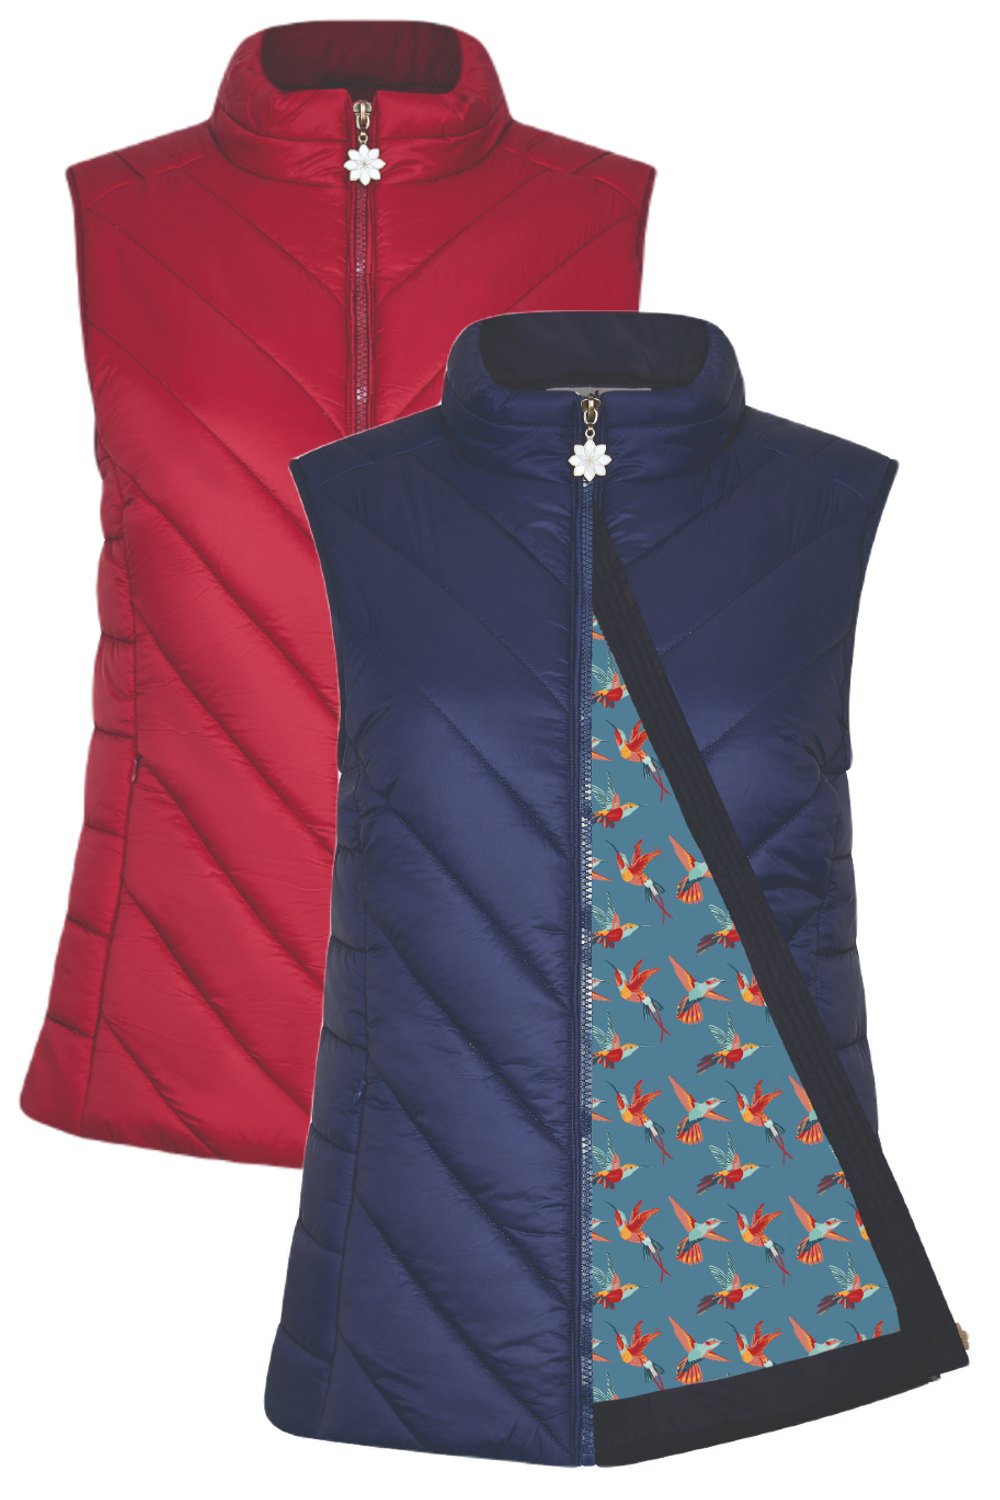 Champion Lundy Ladies Gilet In Red, Navy